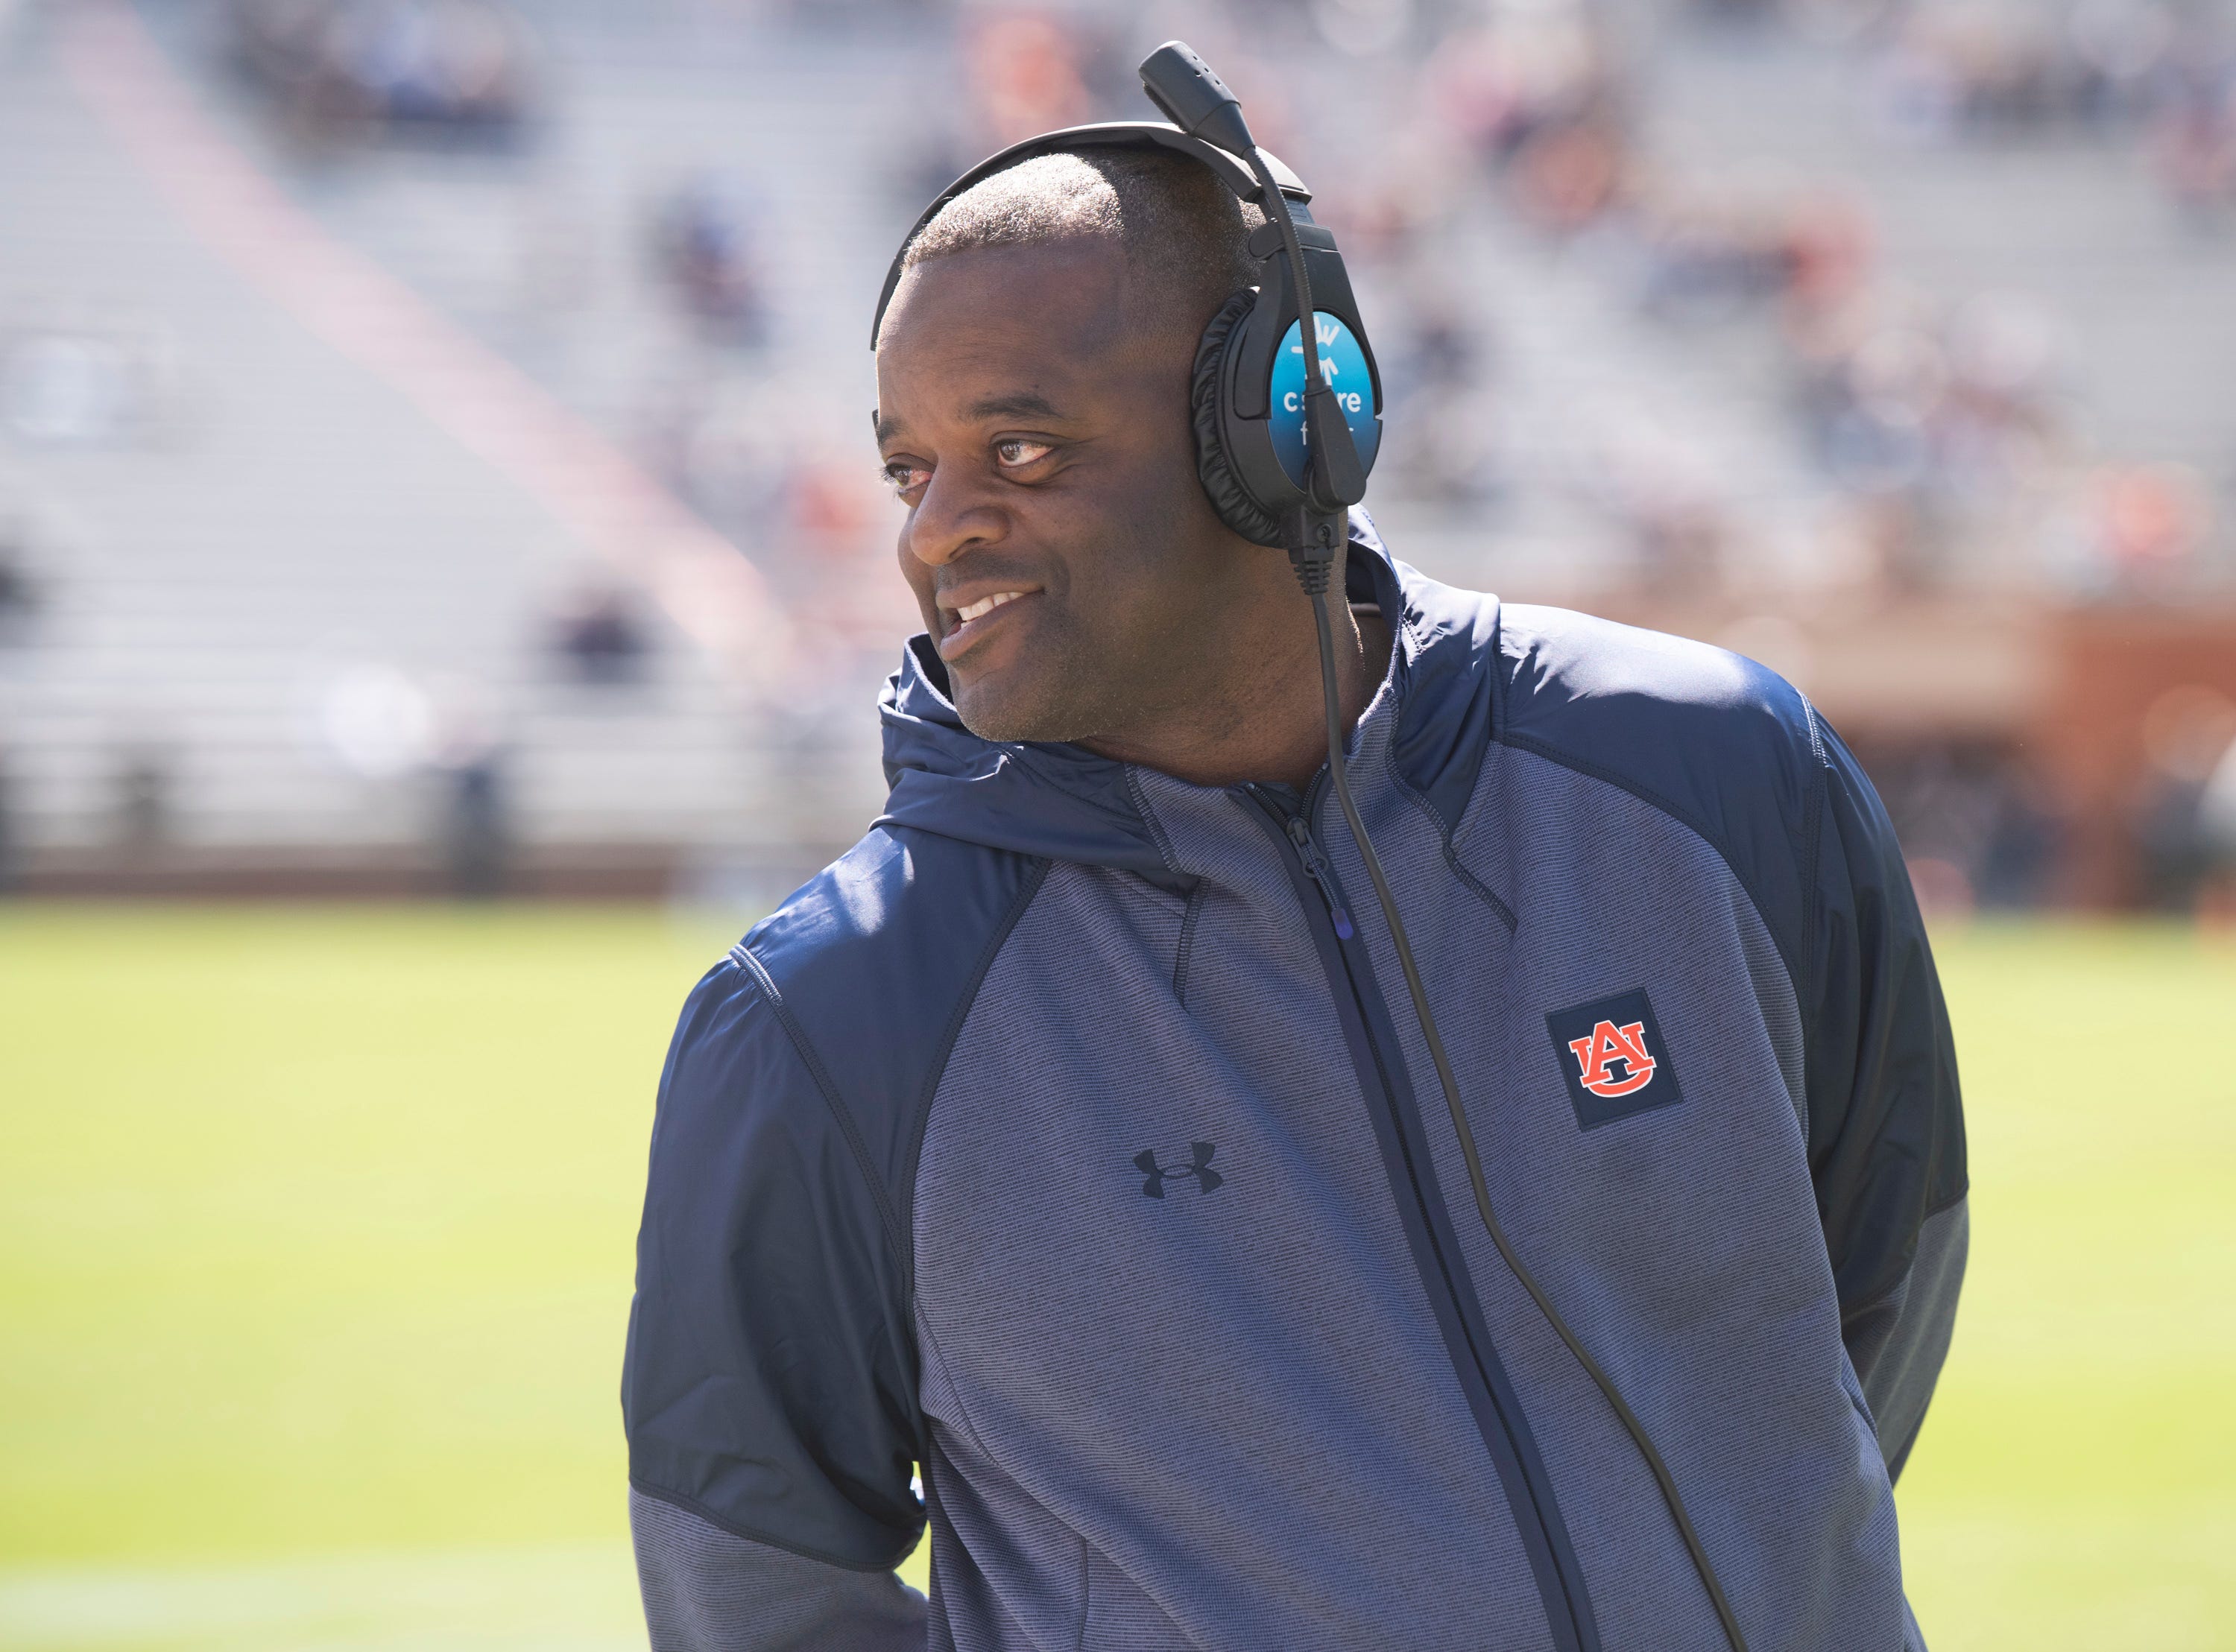 Auburn Tigers wide receivers coach Ike Hilliard during the A-Day spring practice at Jordan-Hare Stadium in Auburn, Ala., on Saturday, April 9, 2022.